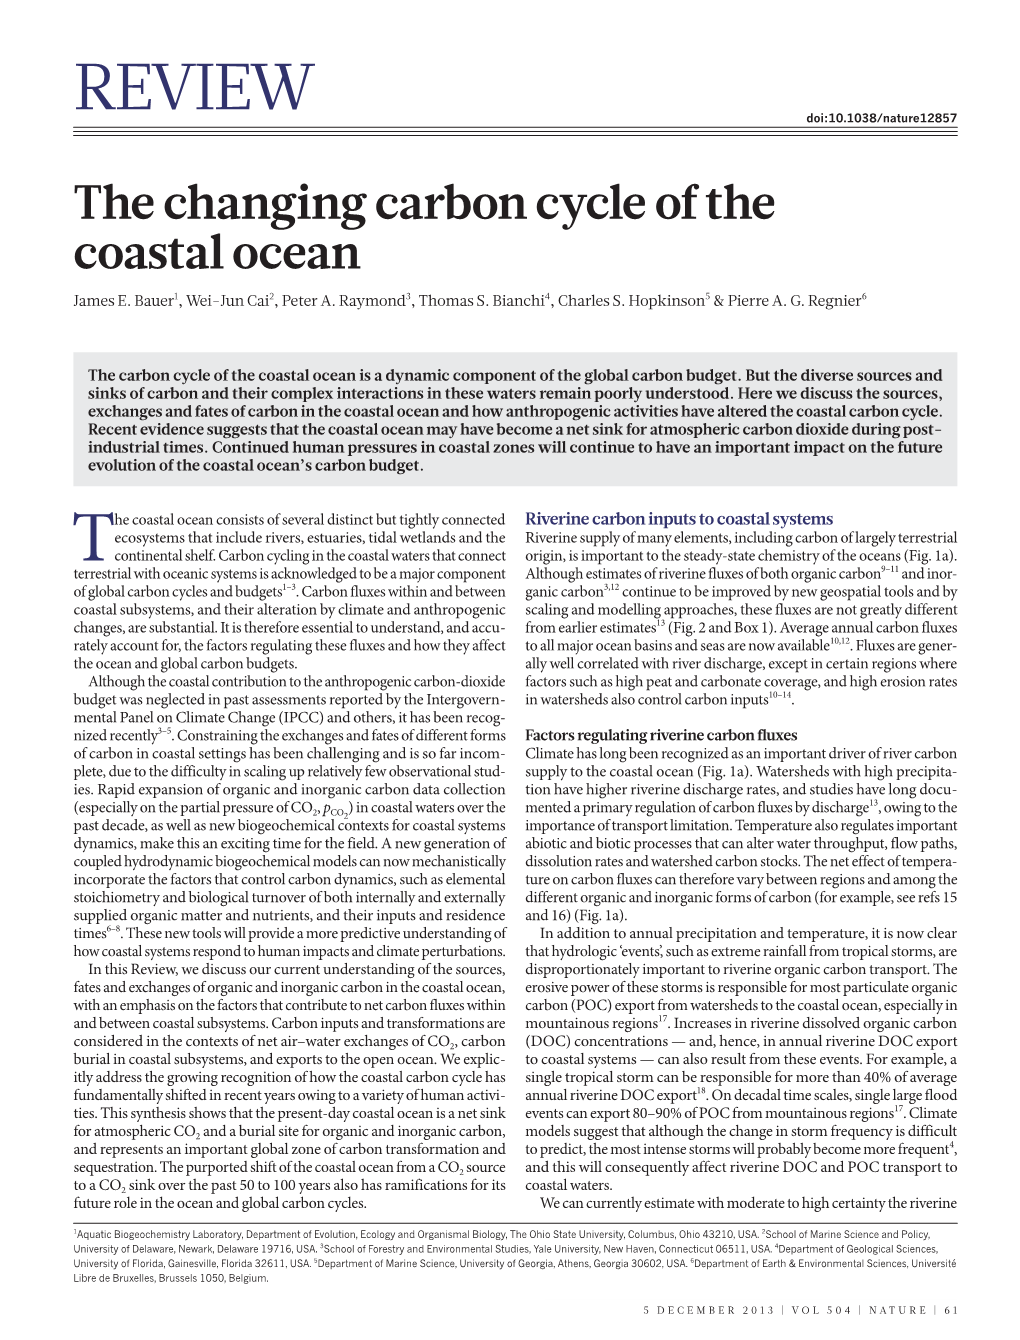 The Changing Carbon Cycle of the Coastal Ocean